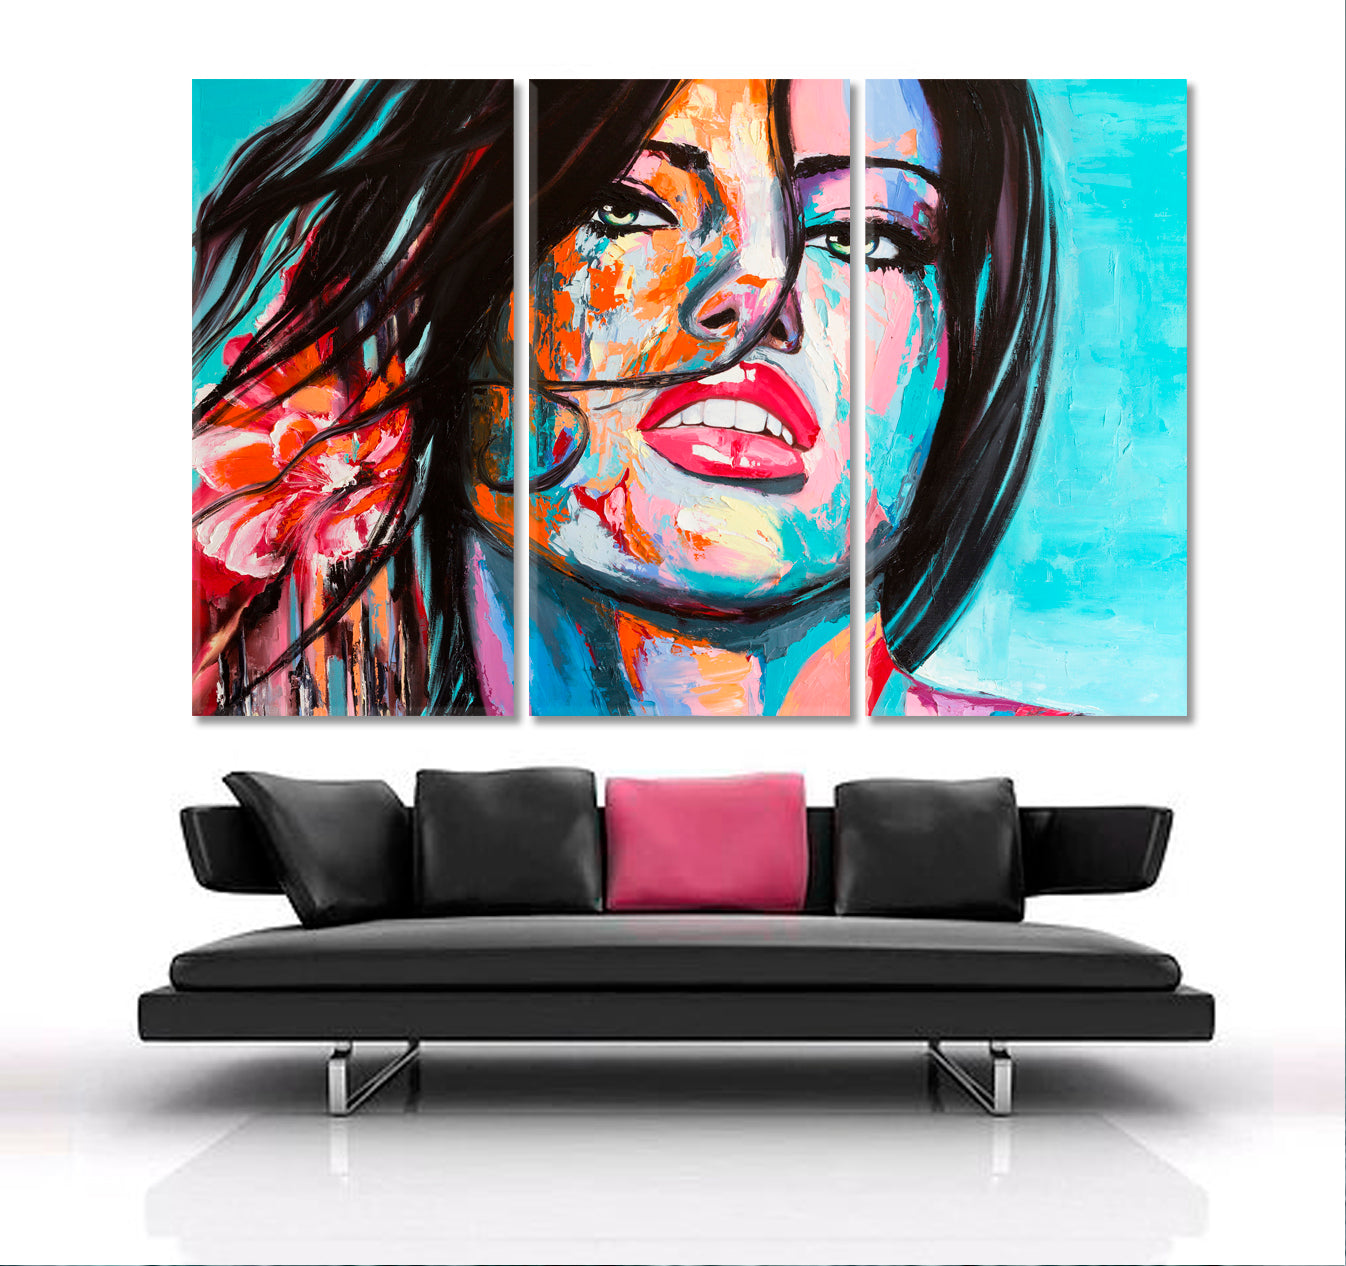 COLORFUL EMOTIONS Charming Young Woman Fantasy Girl Pop Art Style Trendy Art People Portrait Wall Hangings Artesty   